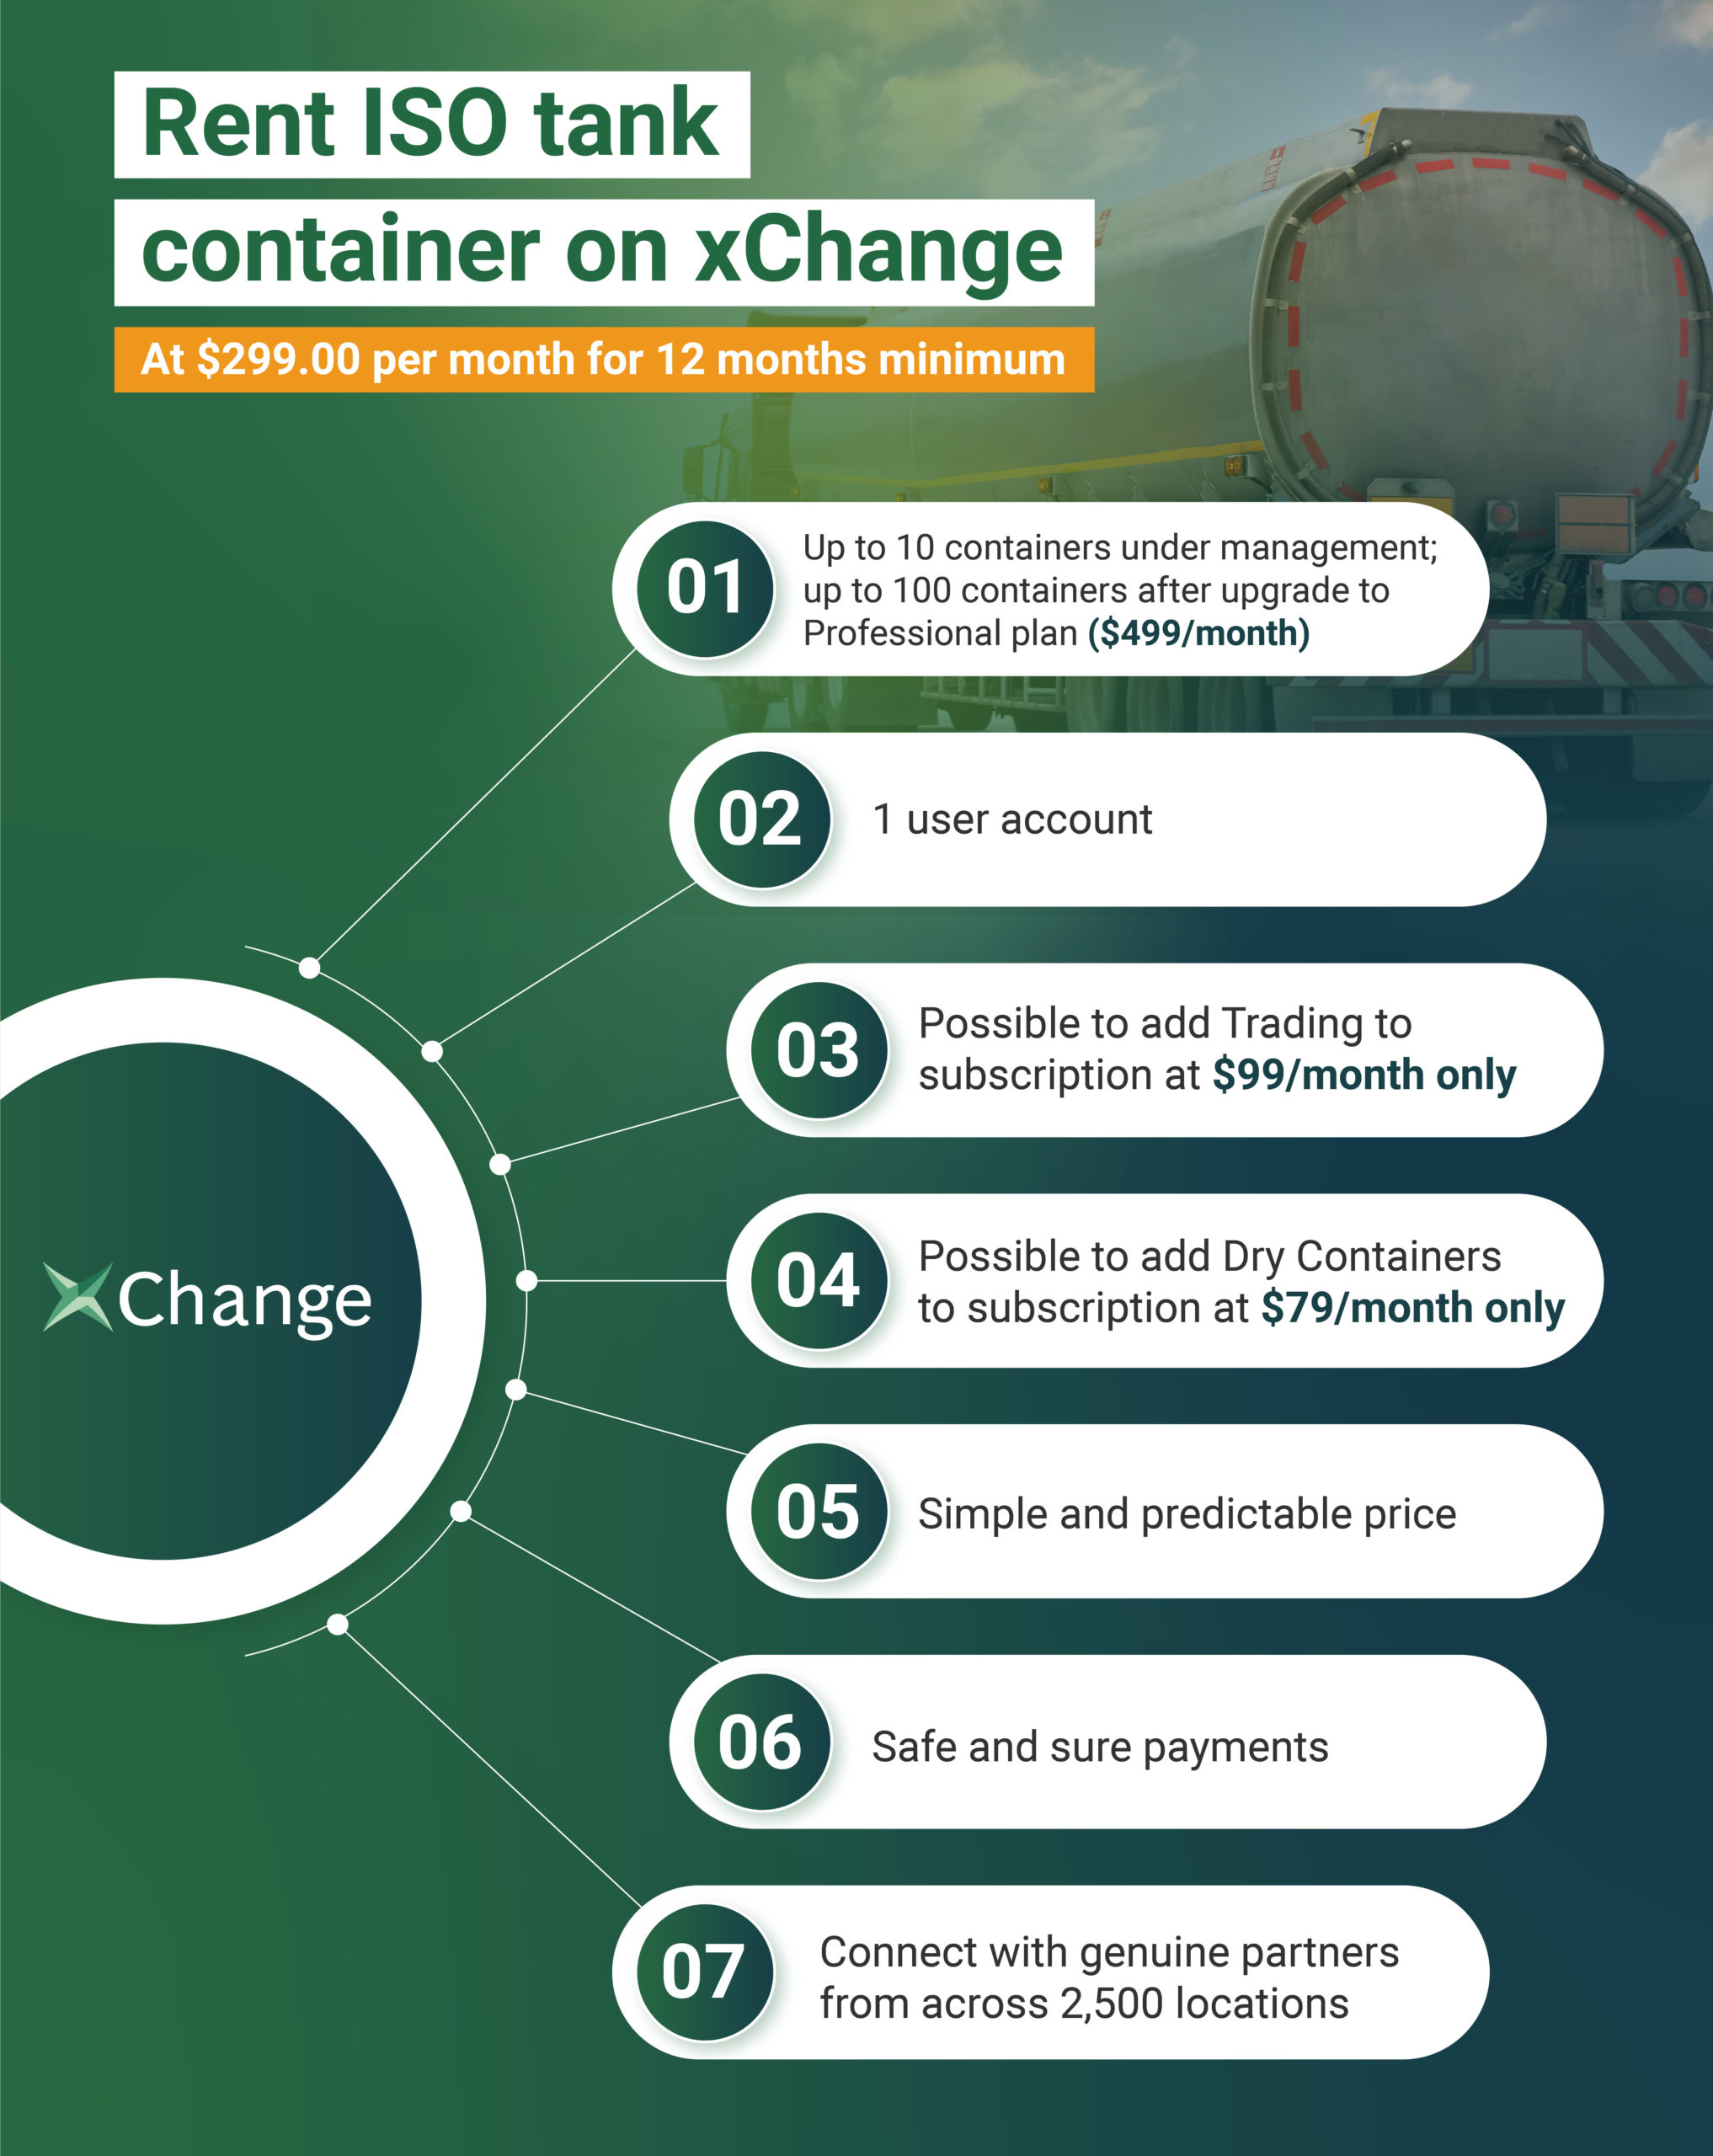 ISO tank container rentals: Your guide to know it all [2022]